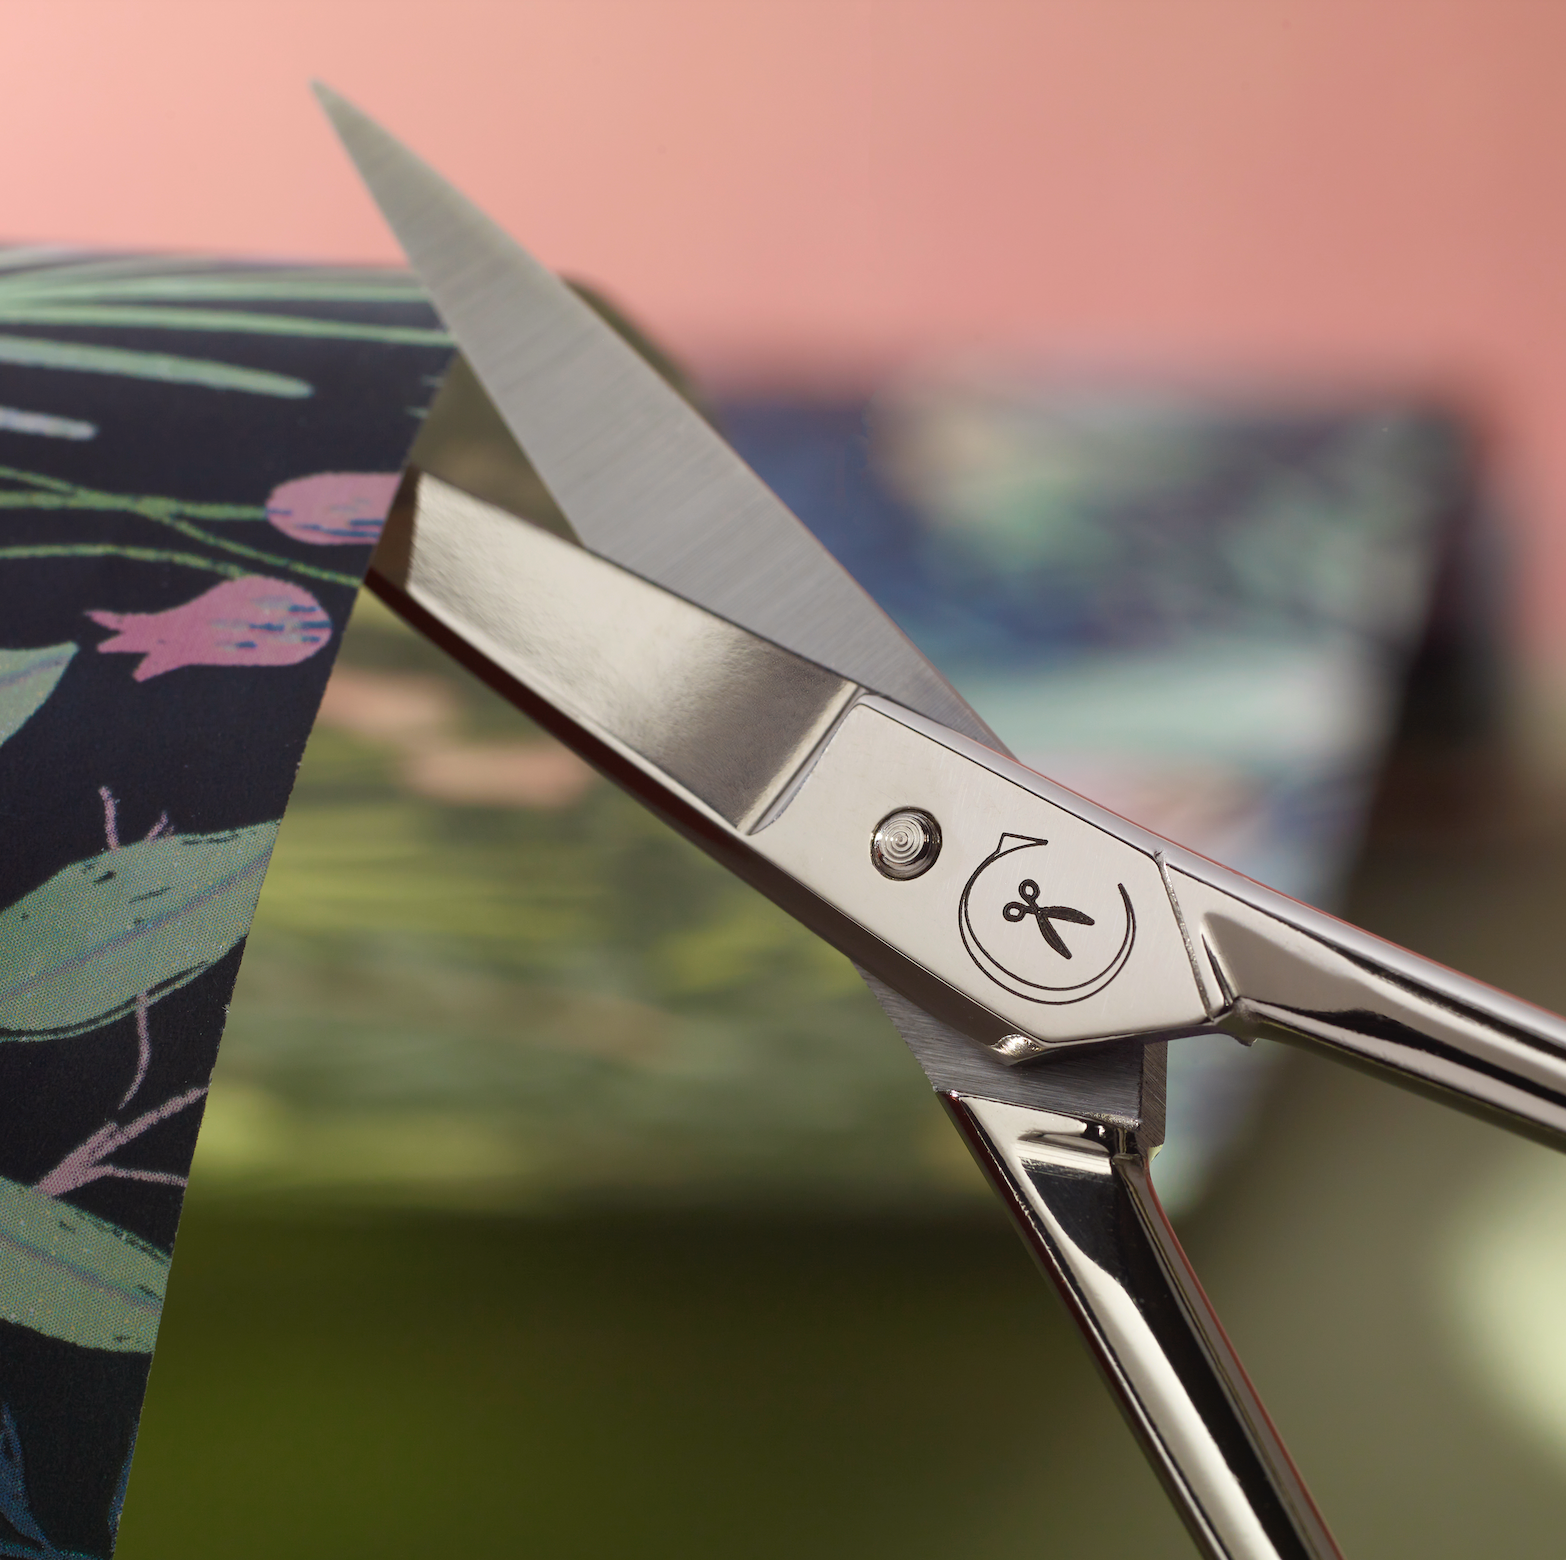 STEP AWAY from the Fabric Shears! - Ciselier Company